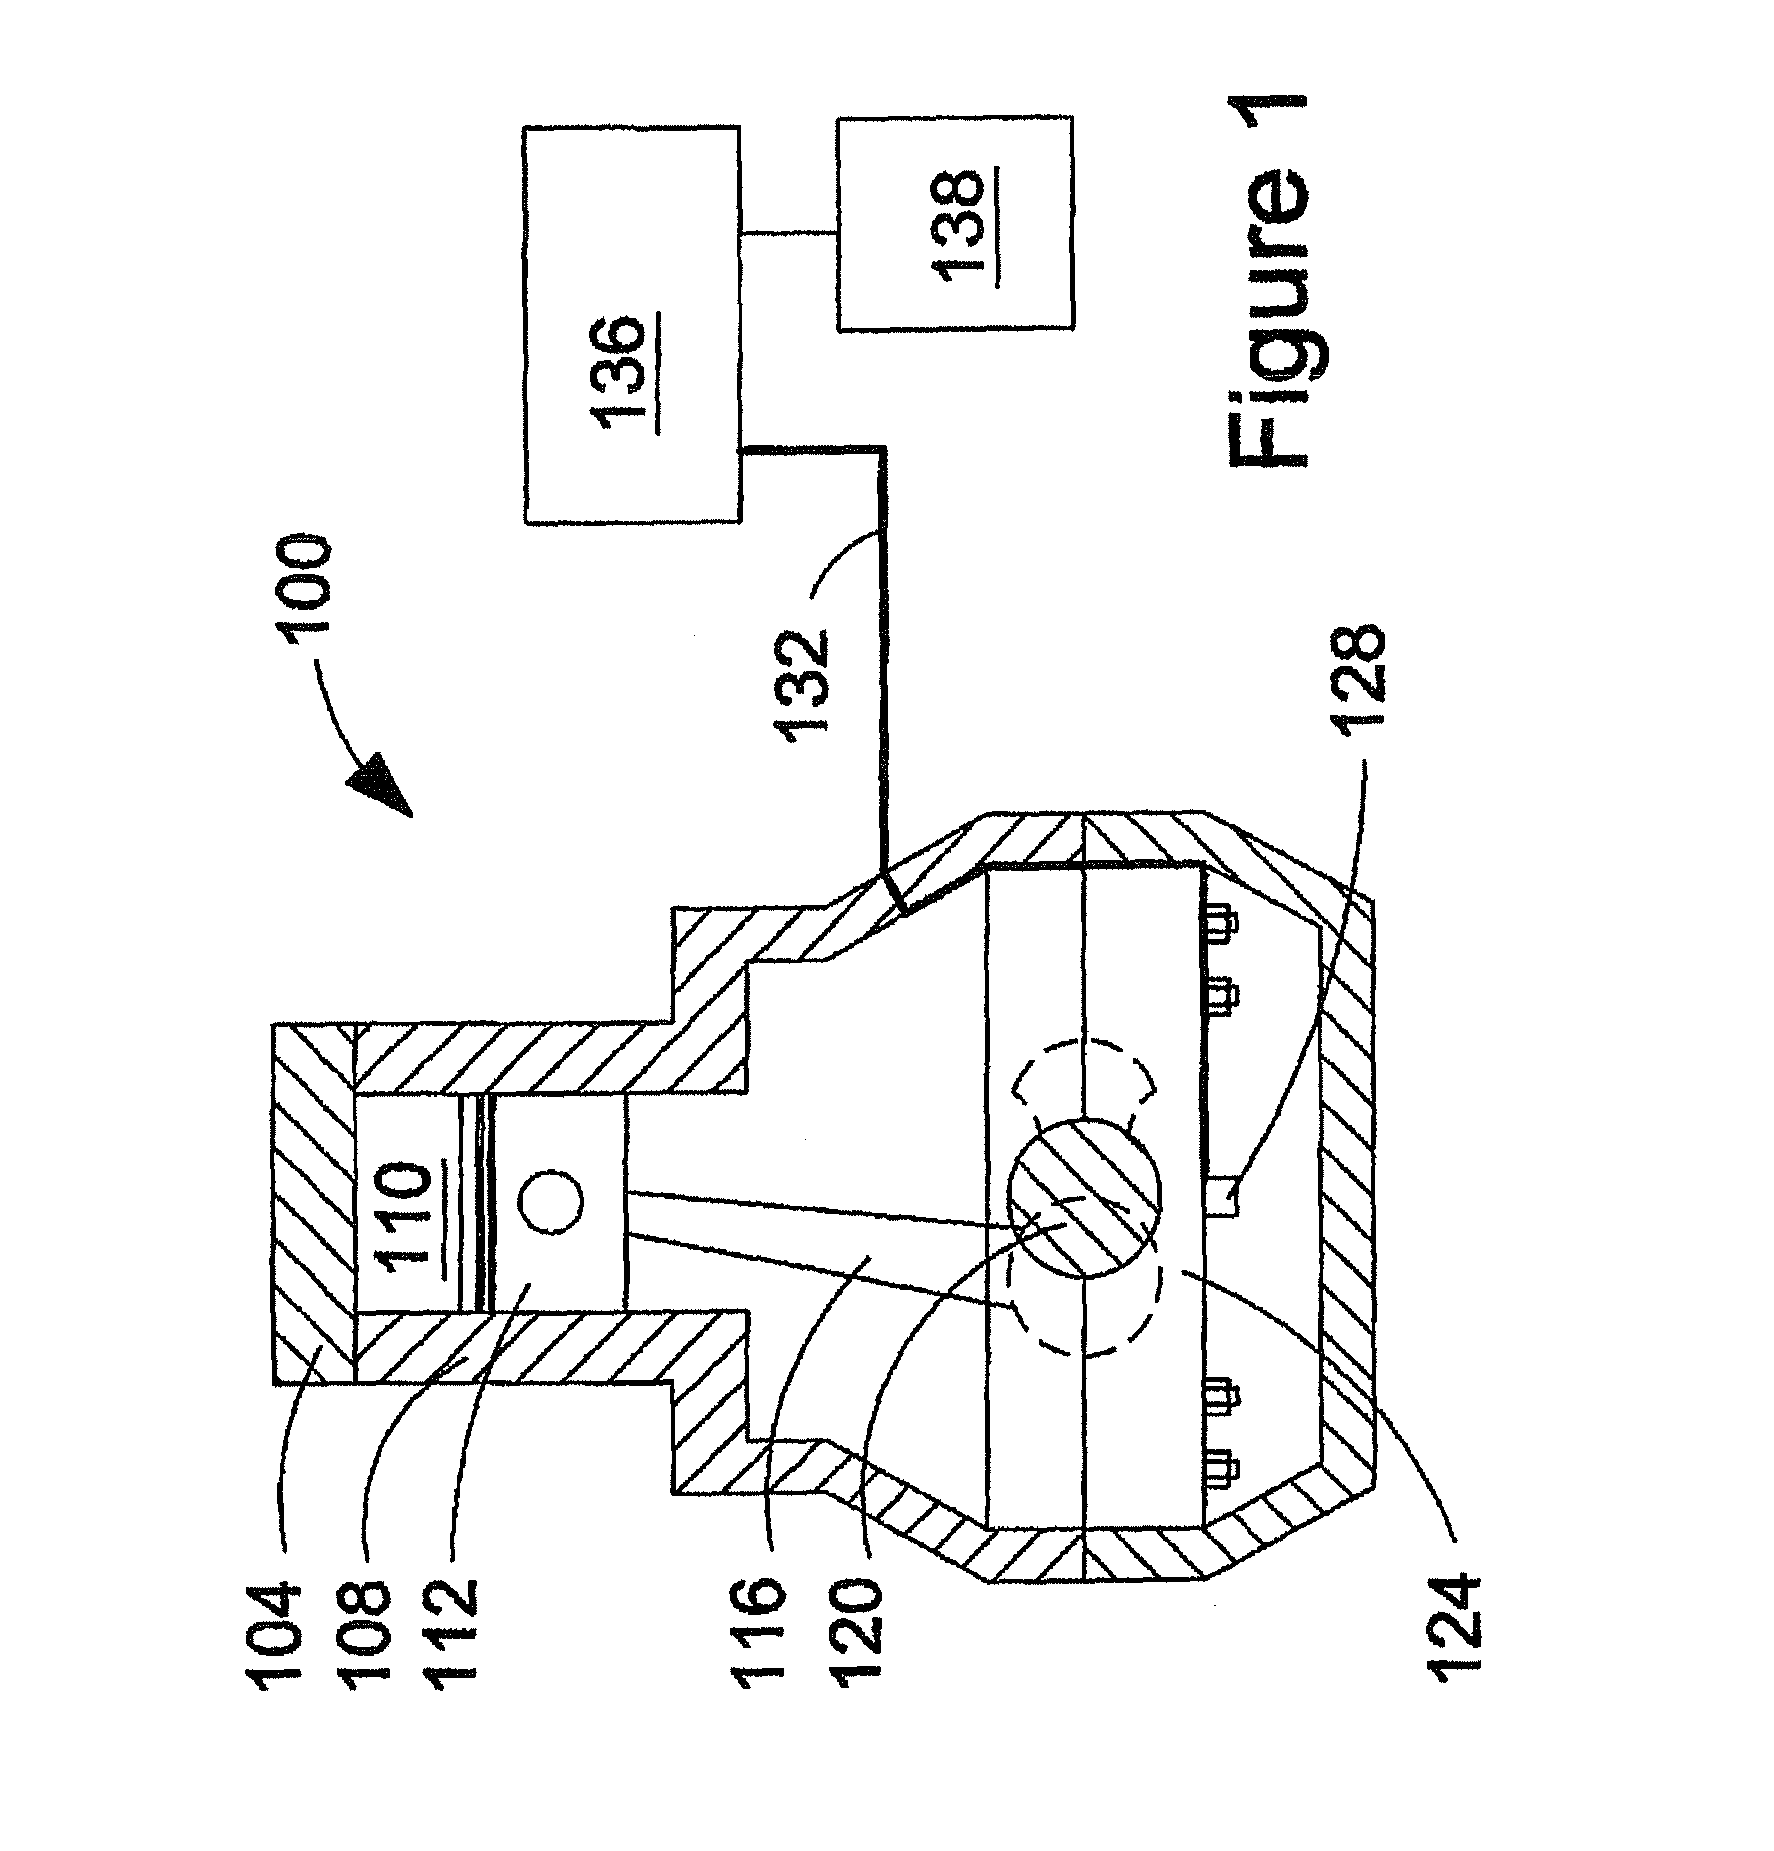 Method and apparatus for using an accelerometer signal to detect misfiring in an internal combustion engine